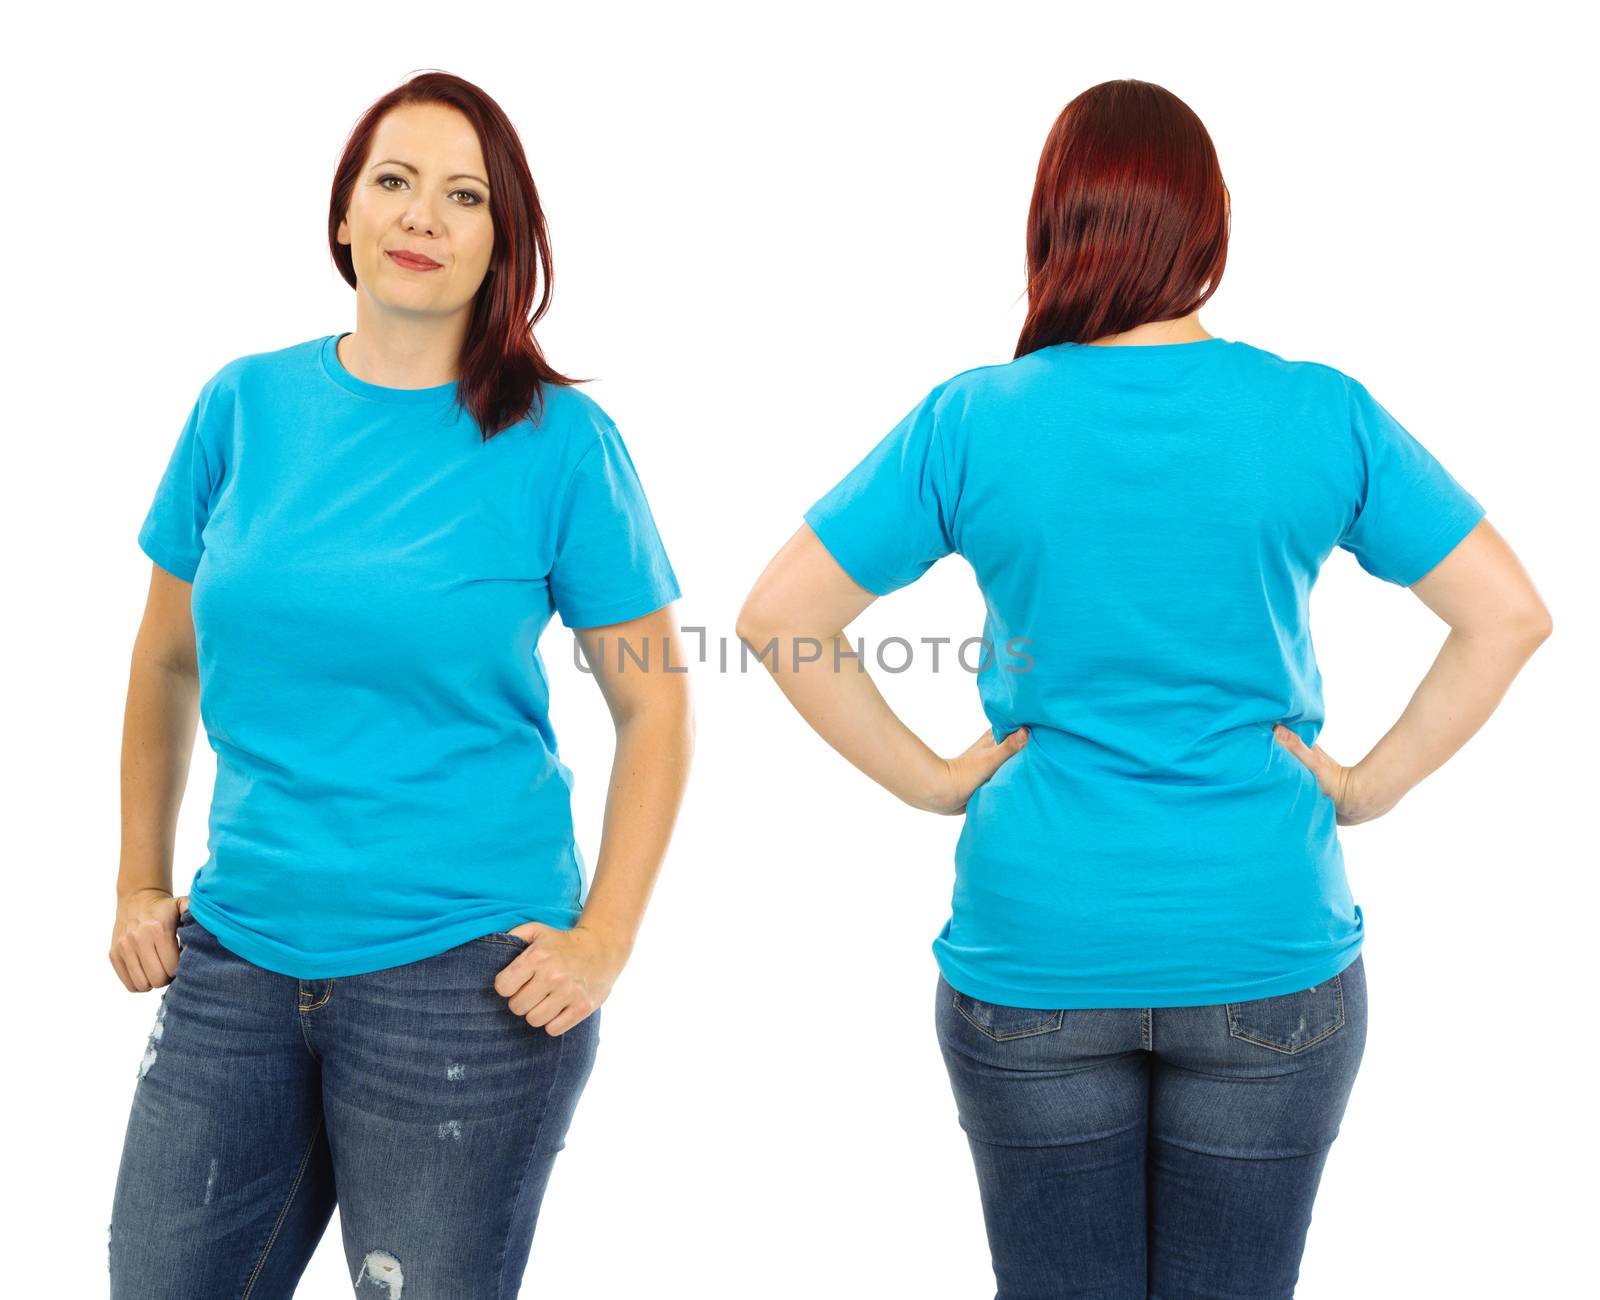 Photo of a woman posing with a blank light blue t-shirt and red hair, ready for your artwork or design.
